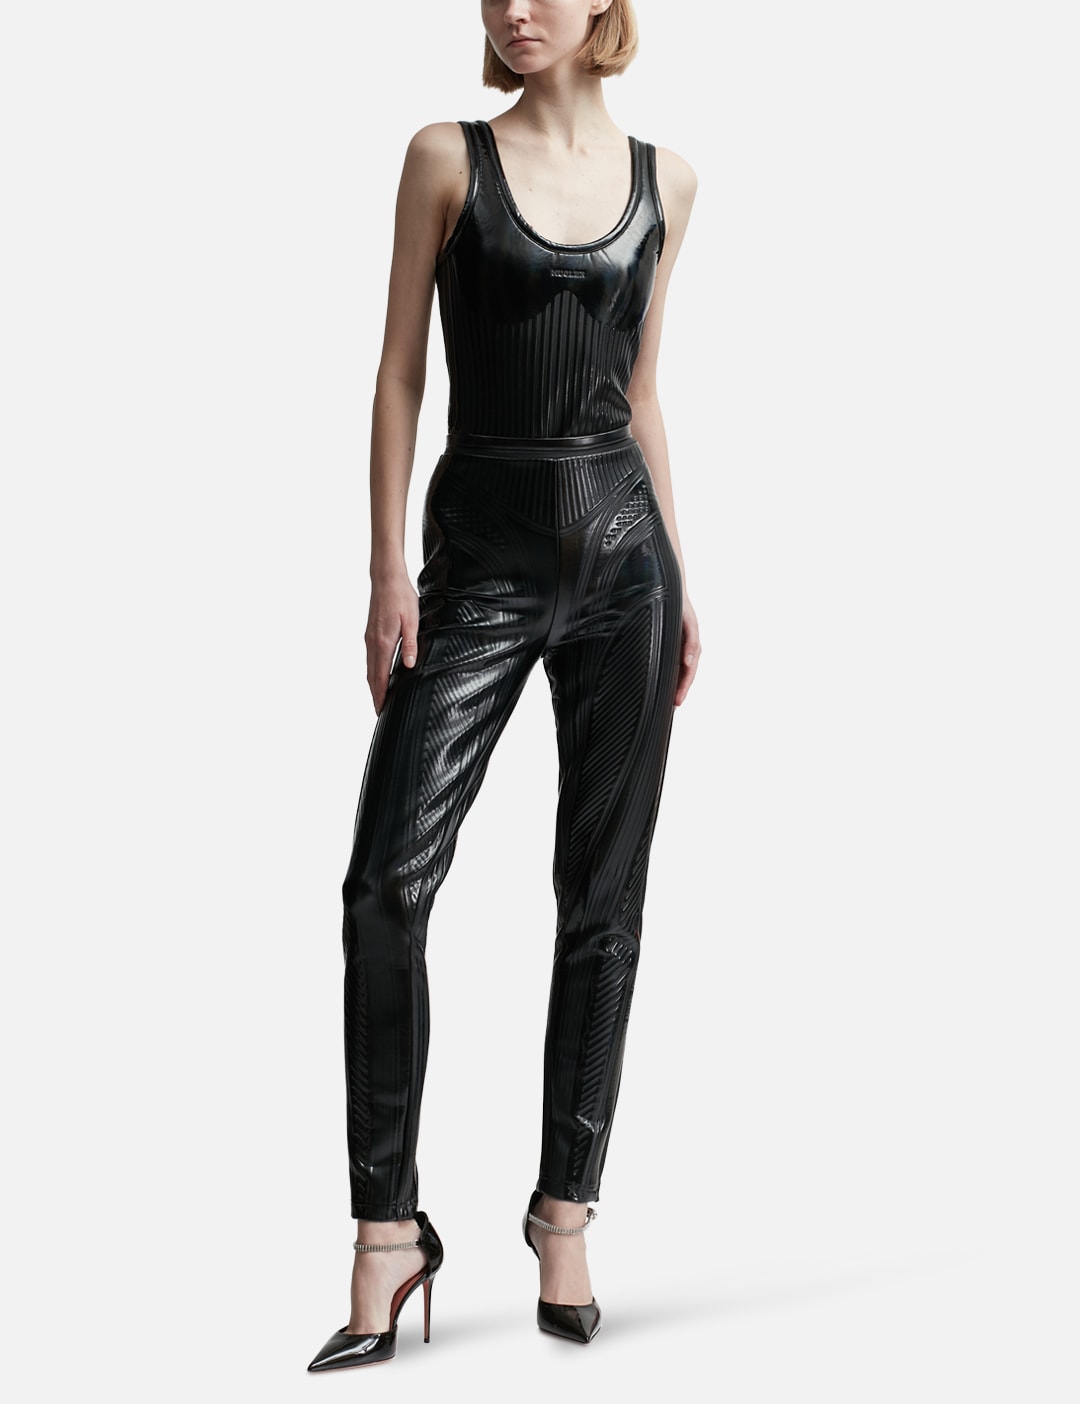 MUGLER - Bicolor Spiral Leggings  HBX - Globally Curated Fashion and  Lifestyle by Hypebeast